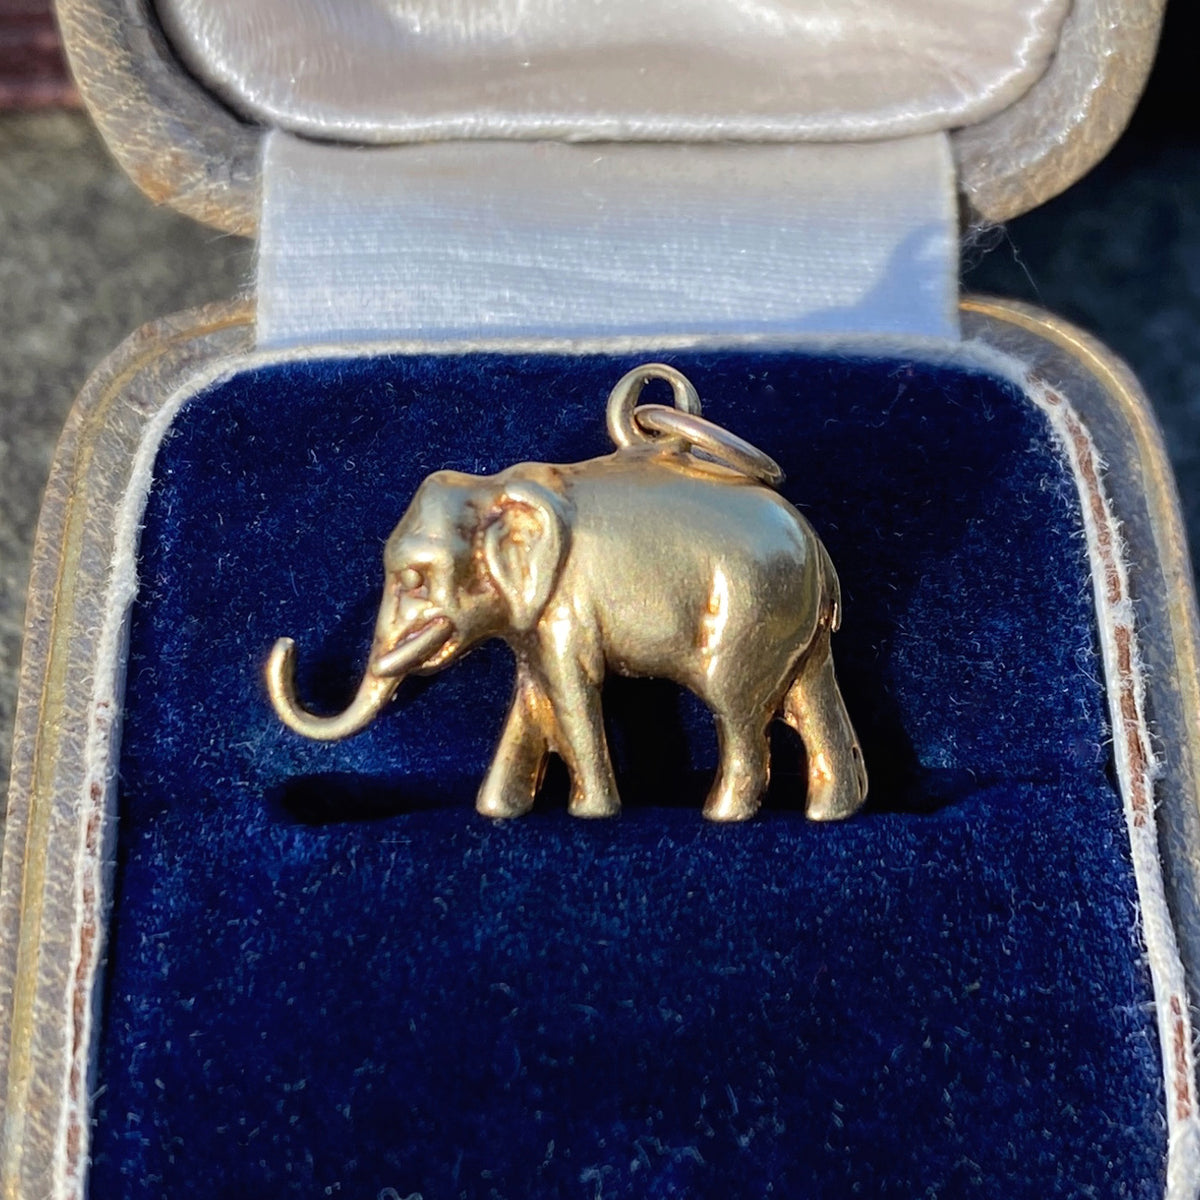 Vintage Elephant Charm sold by Doyle and Doyle an antique and vintage jewelry boutique